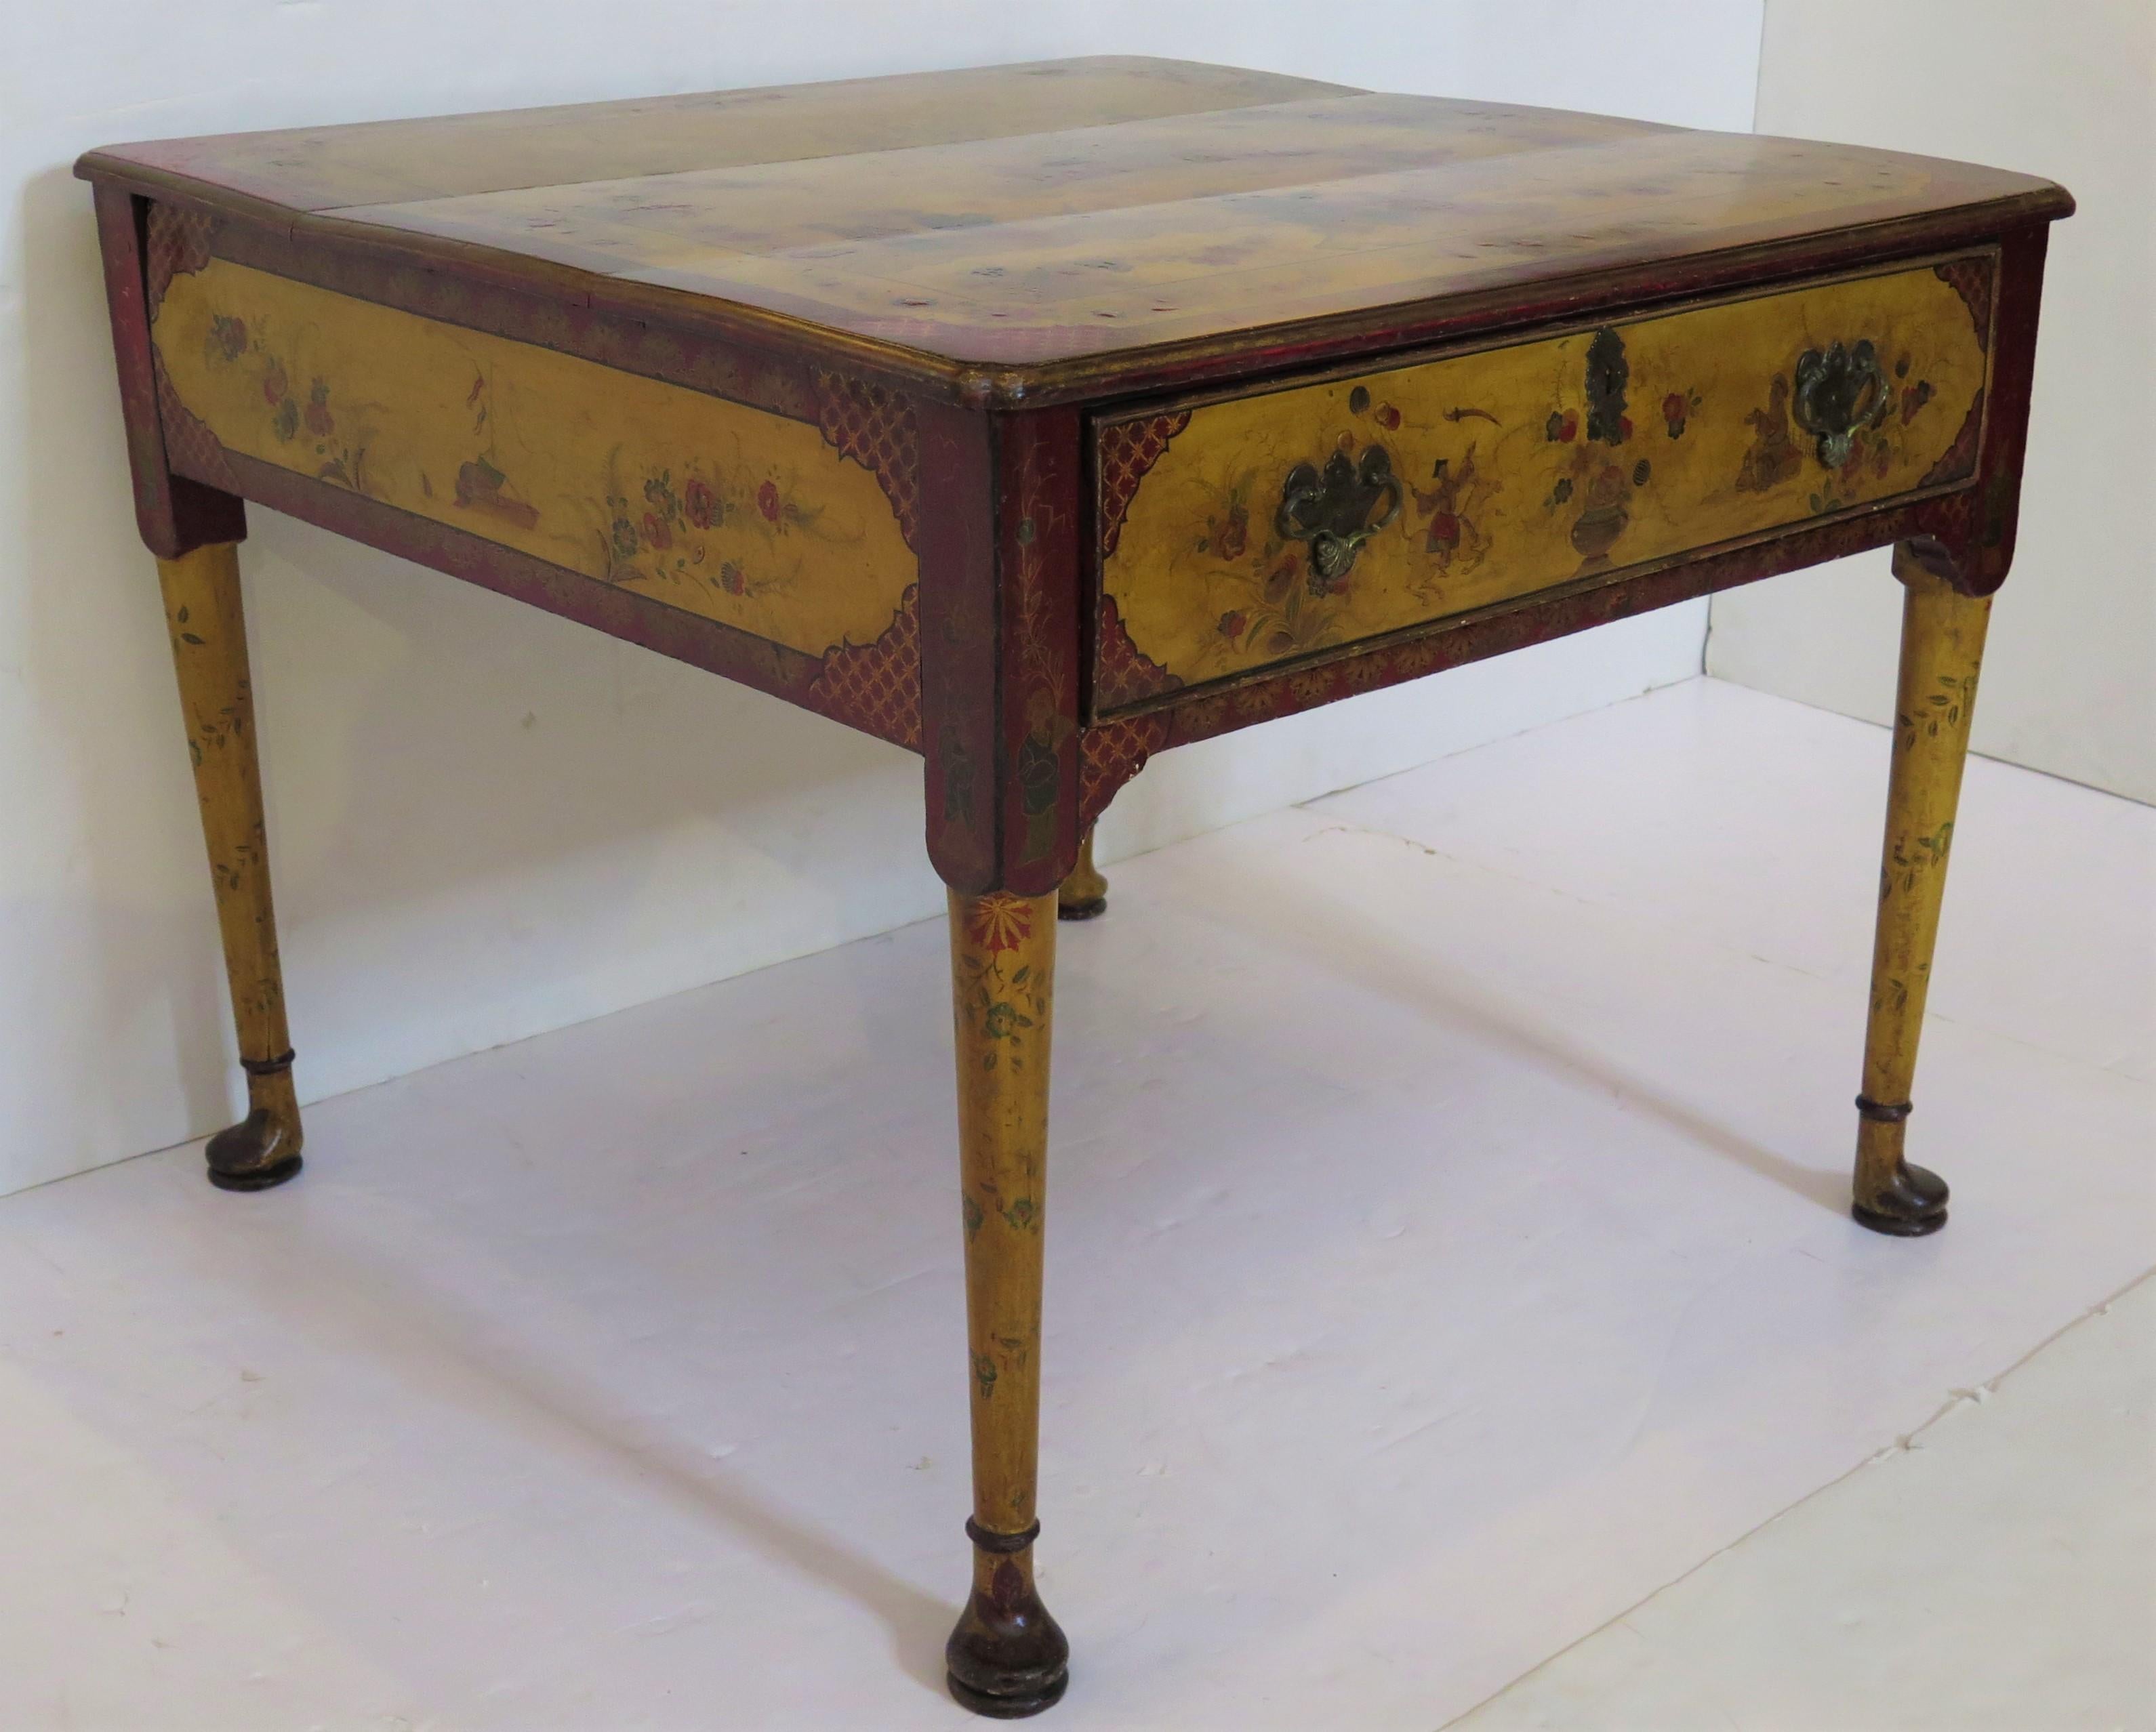 an early 18th century Queen Anne rent table in the Chinese Taste (with Chinoiserie decoration) having one large single drawer (that goes all the way through) with twelve (12) compartments, one (1) for each month, and two (2) large compartments in